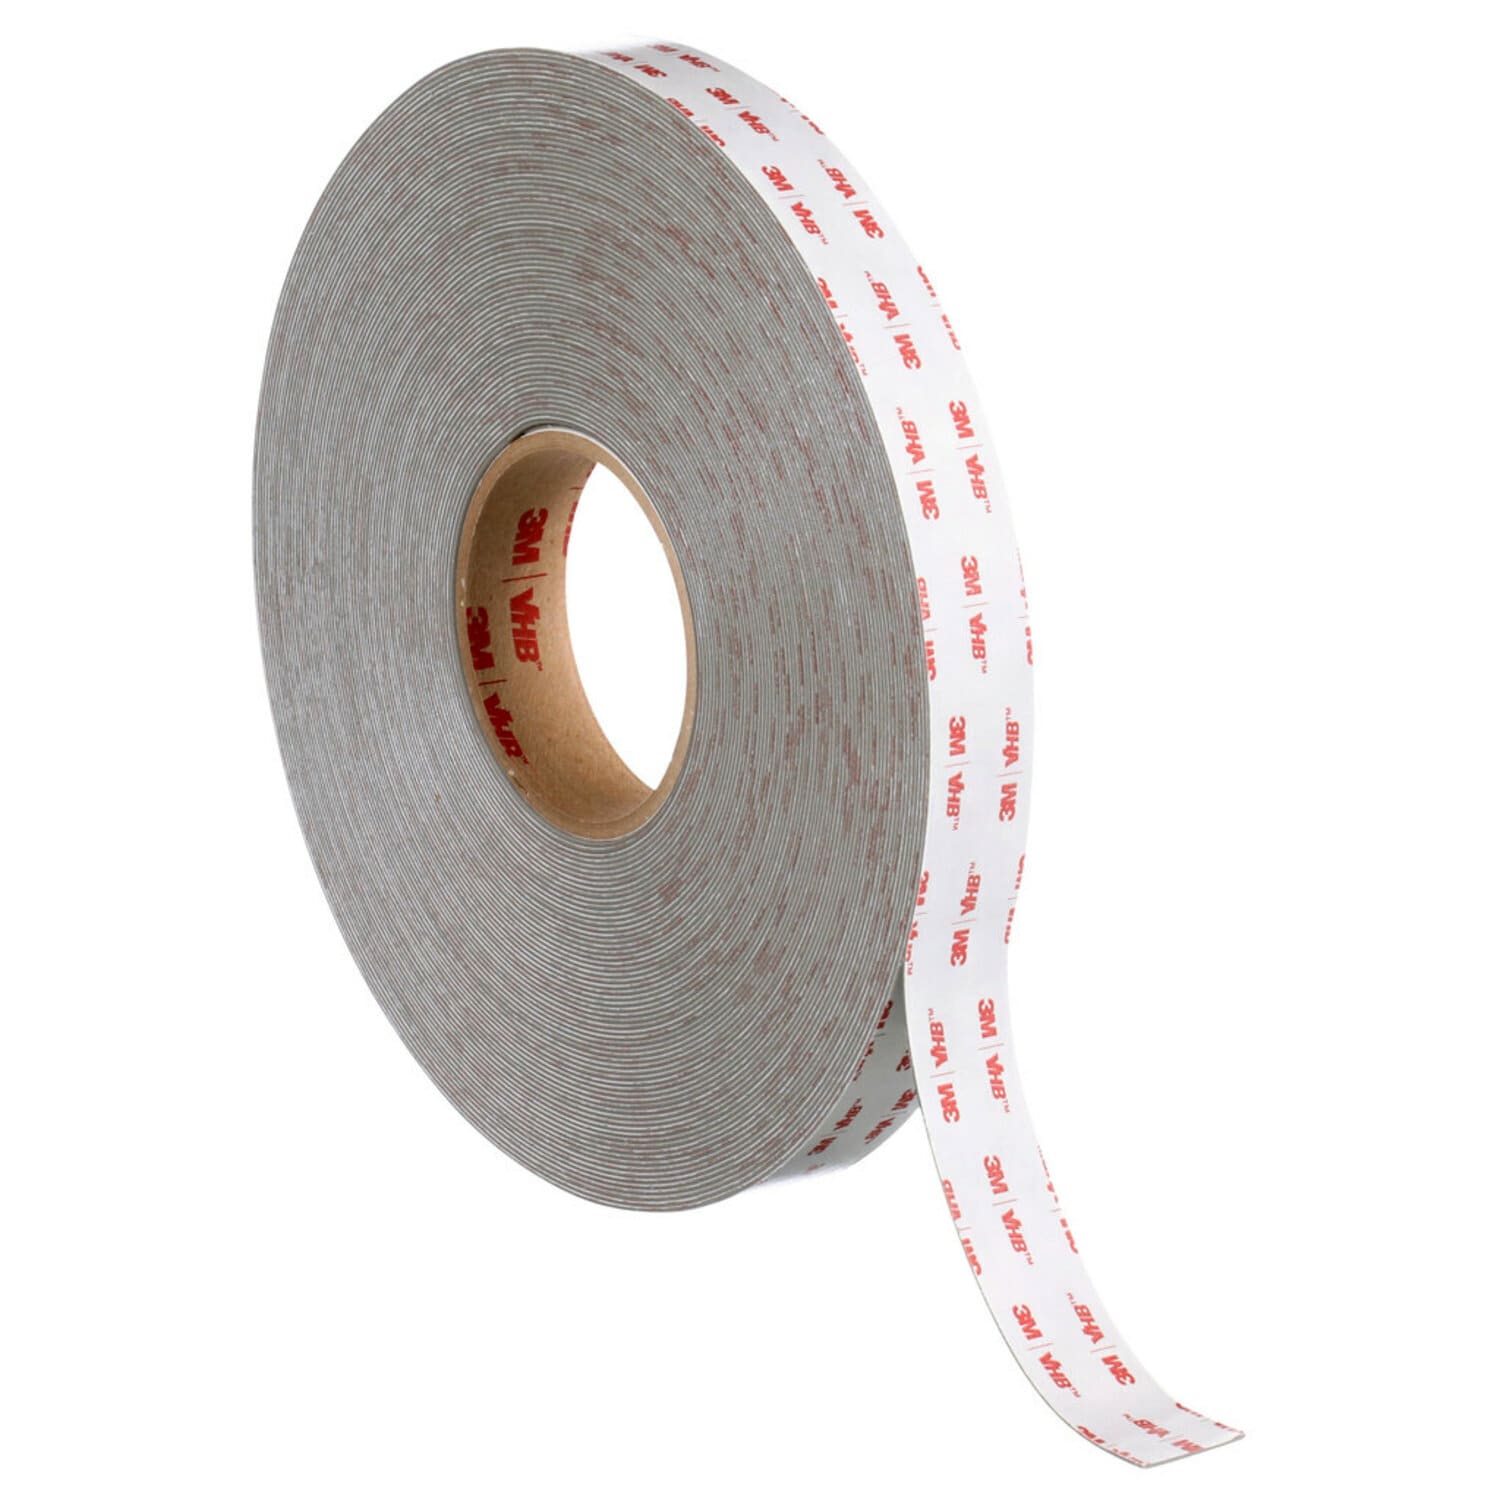 7100273168 - 3M VHB Tape RP+040GP, Gray, 16 mil, Paper Liner, Roll, Config